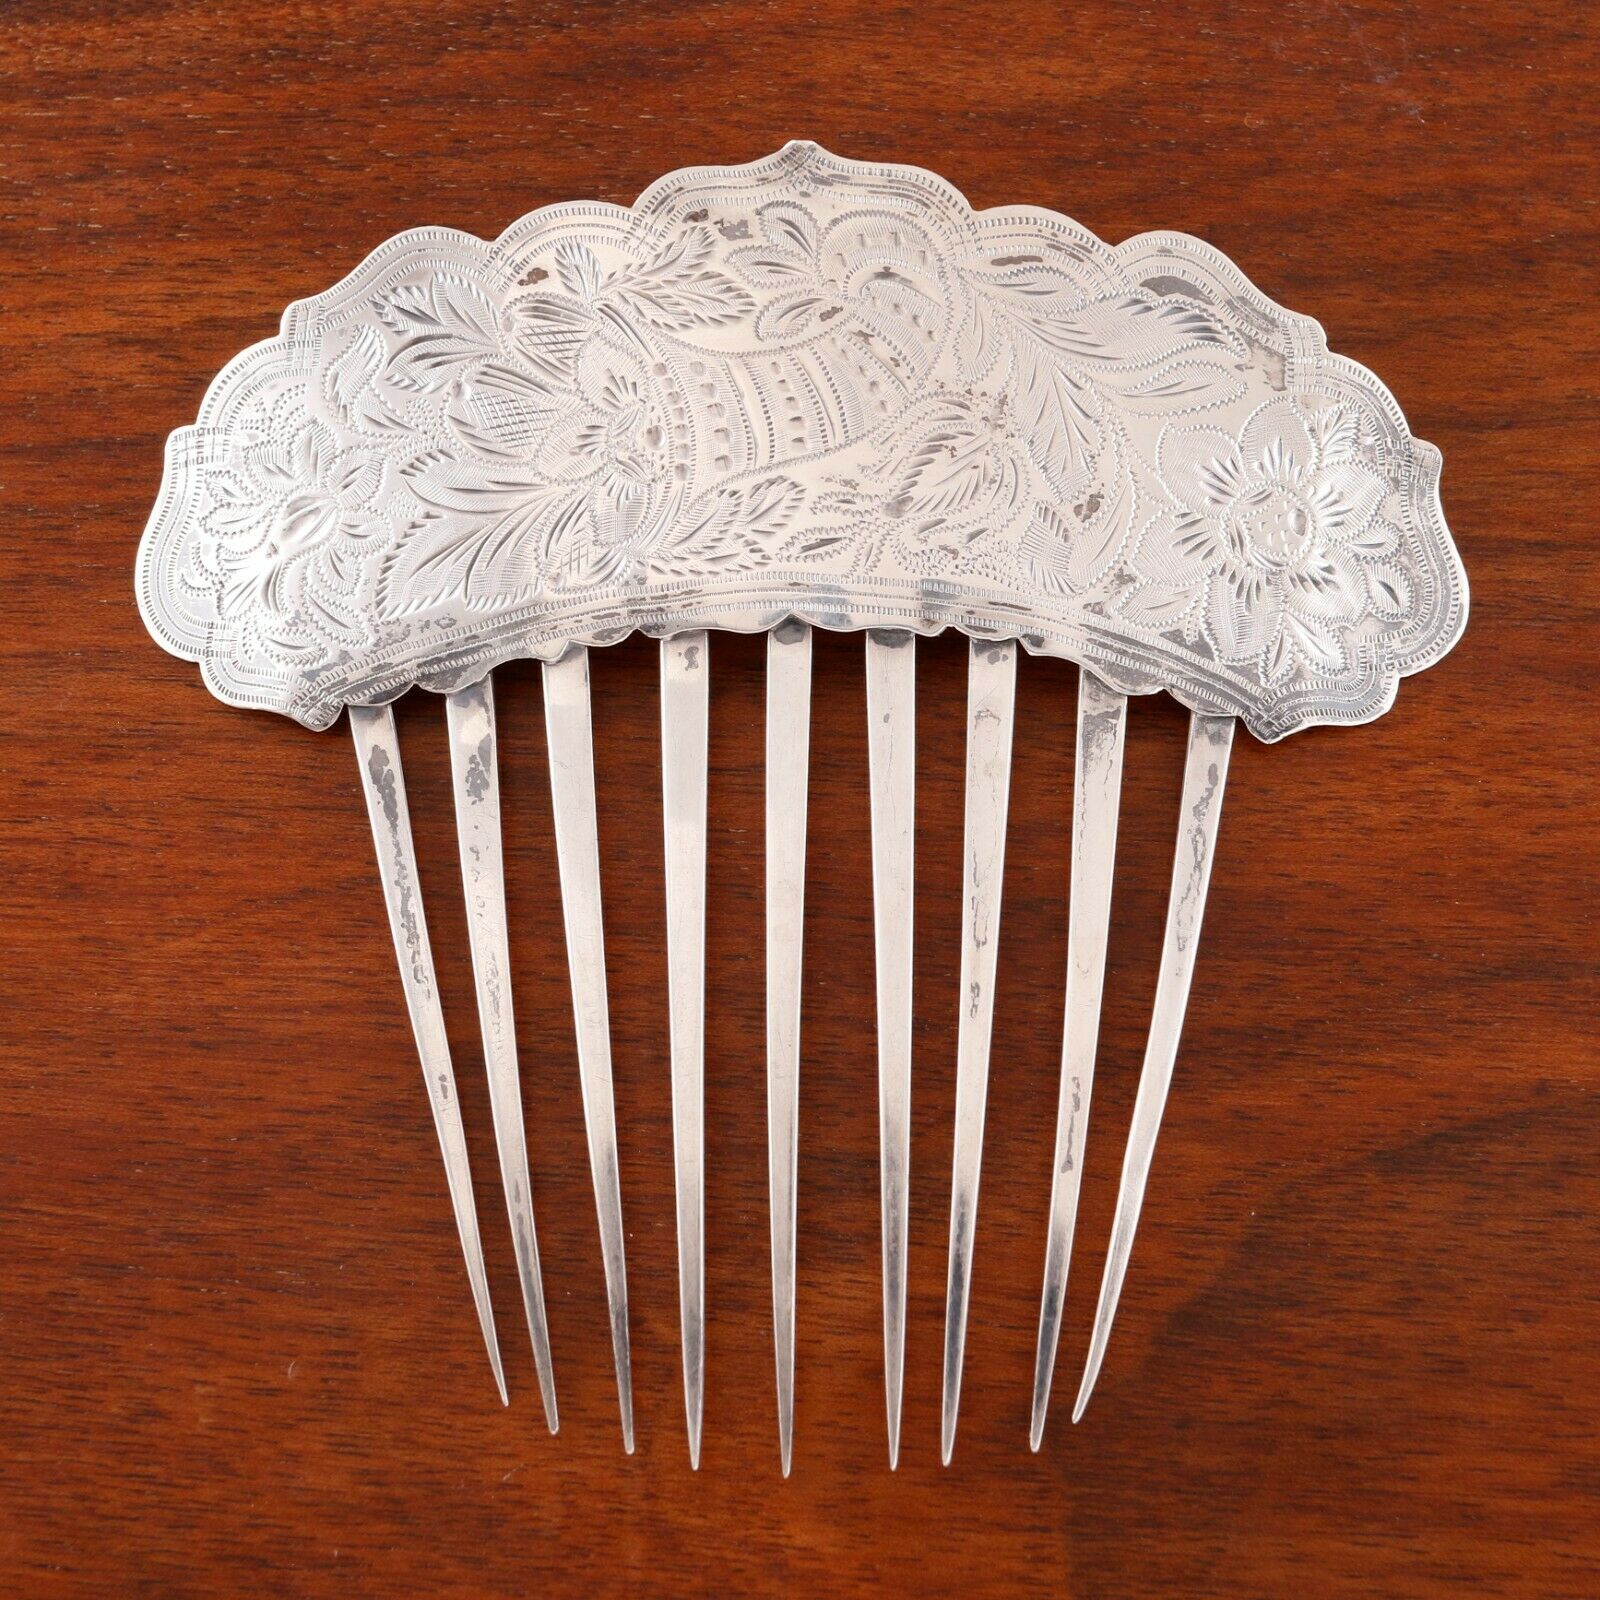 Antique Valuations: AMERICAN AESTHETIC COIN SILVER HAIR COMB ENGINE TURNED CORNUCOPIA FLORAL FOLIATE